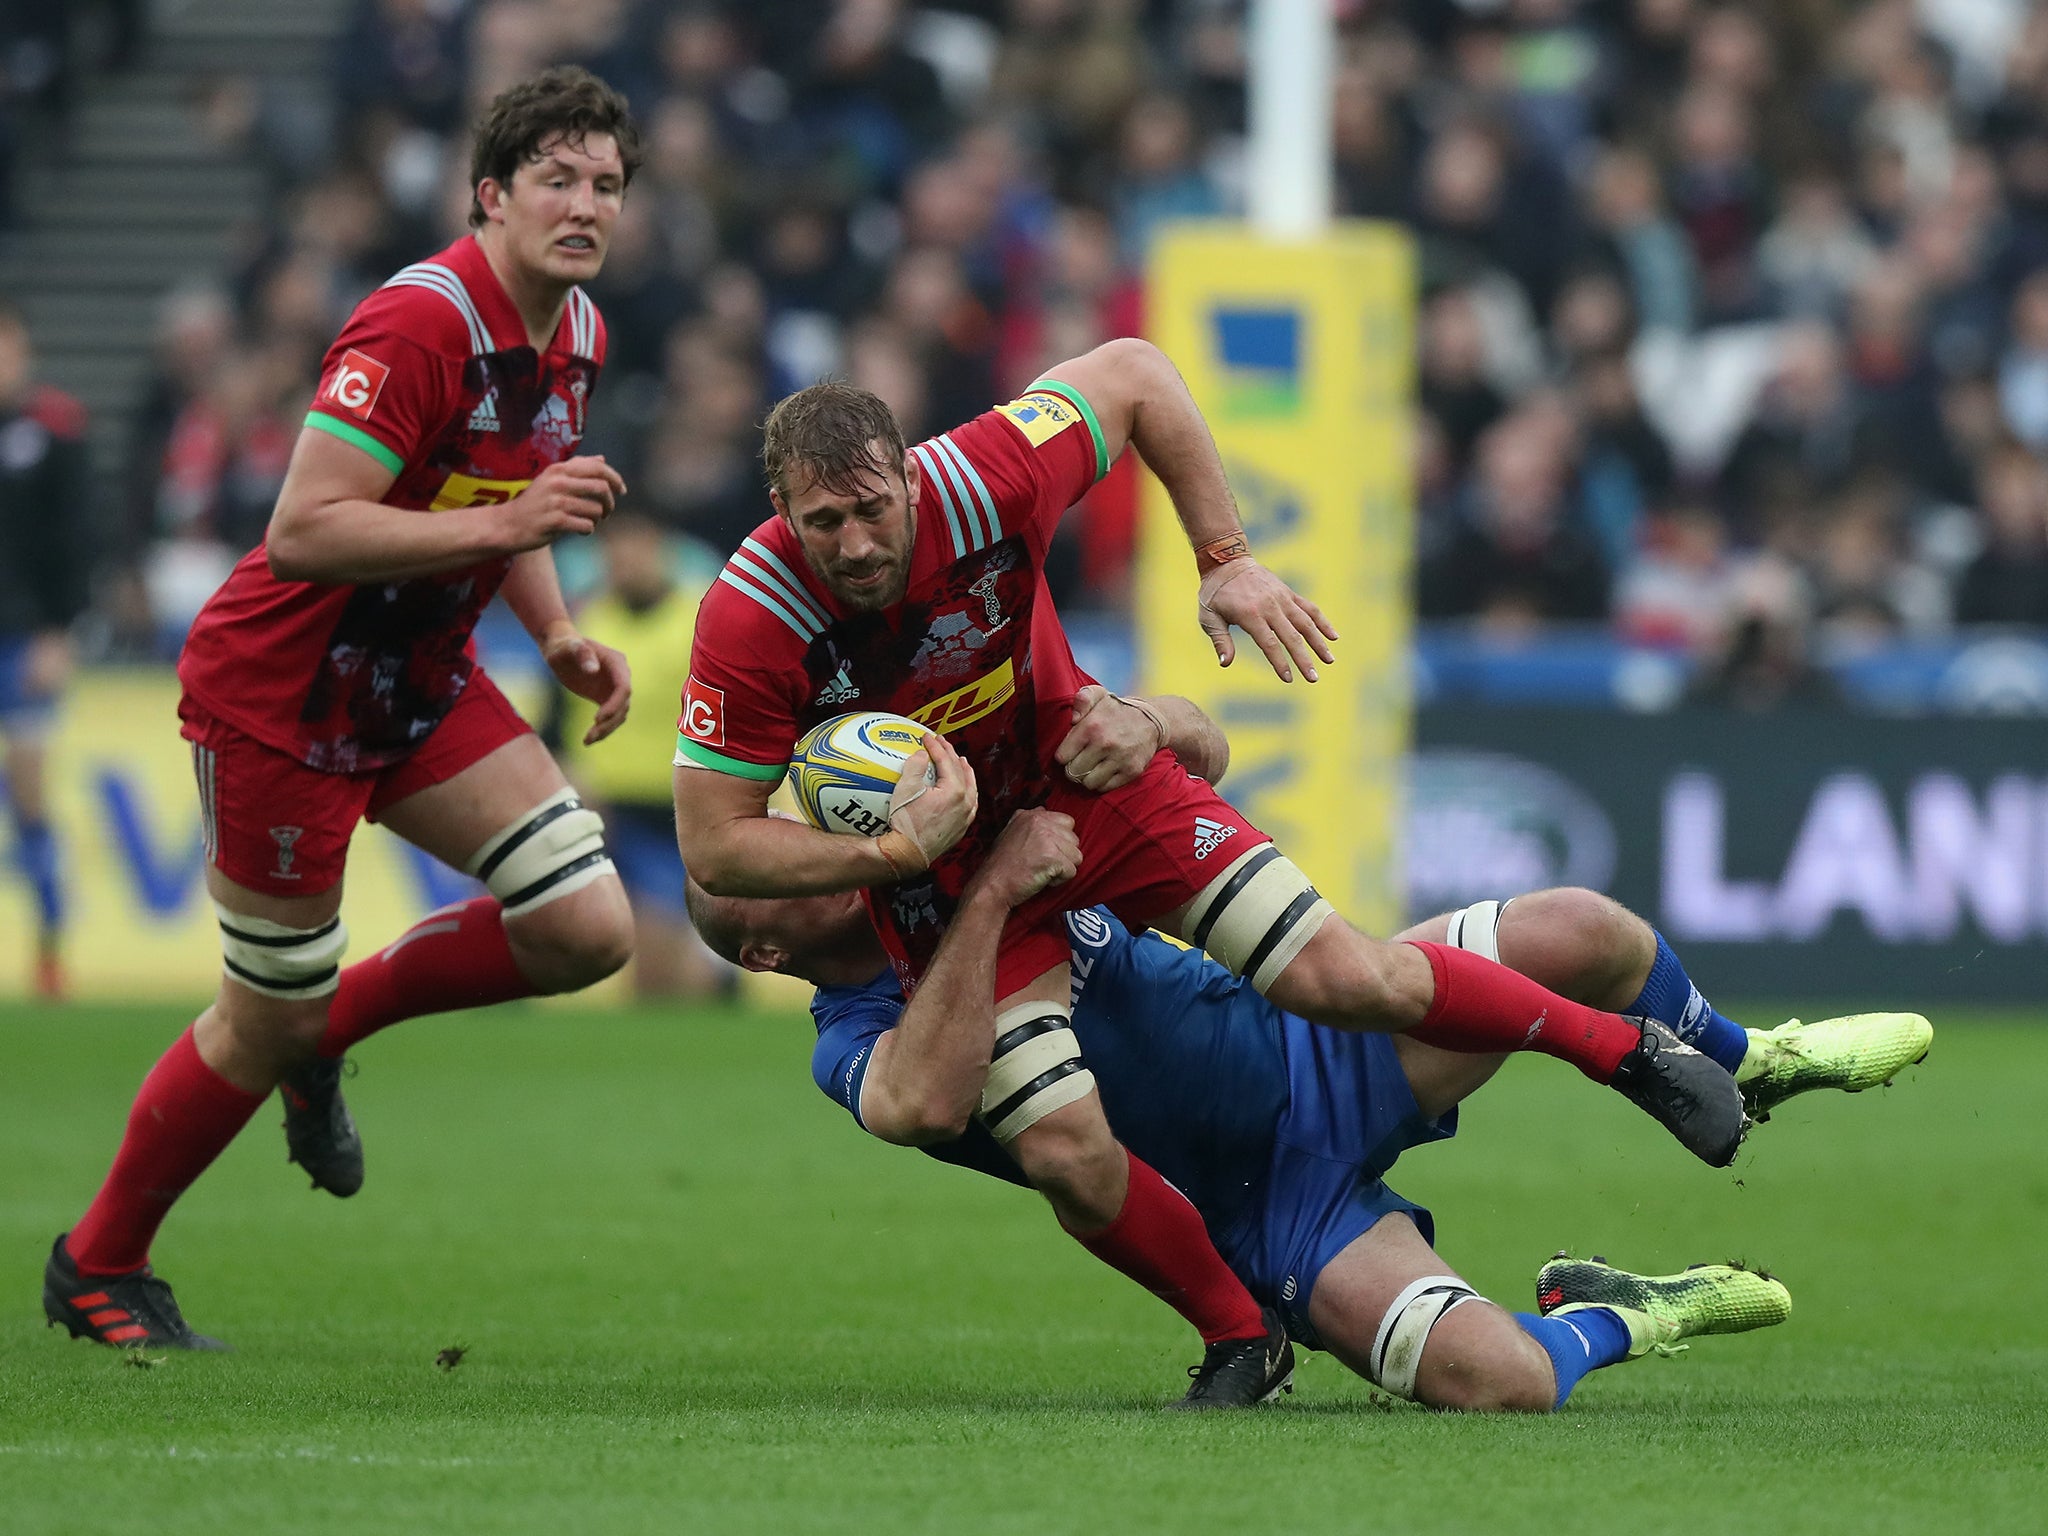 The return of Harlequins' internationals was not enough to see them to victory